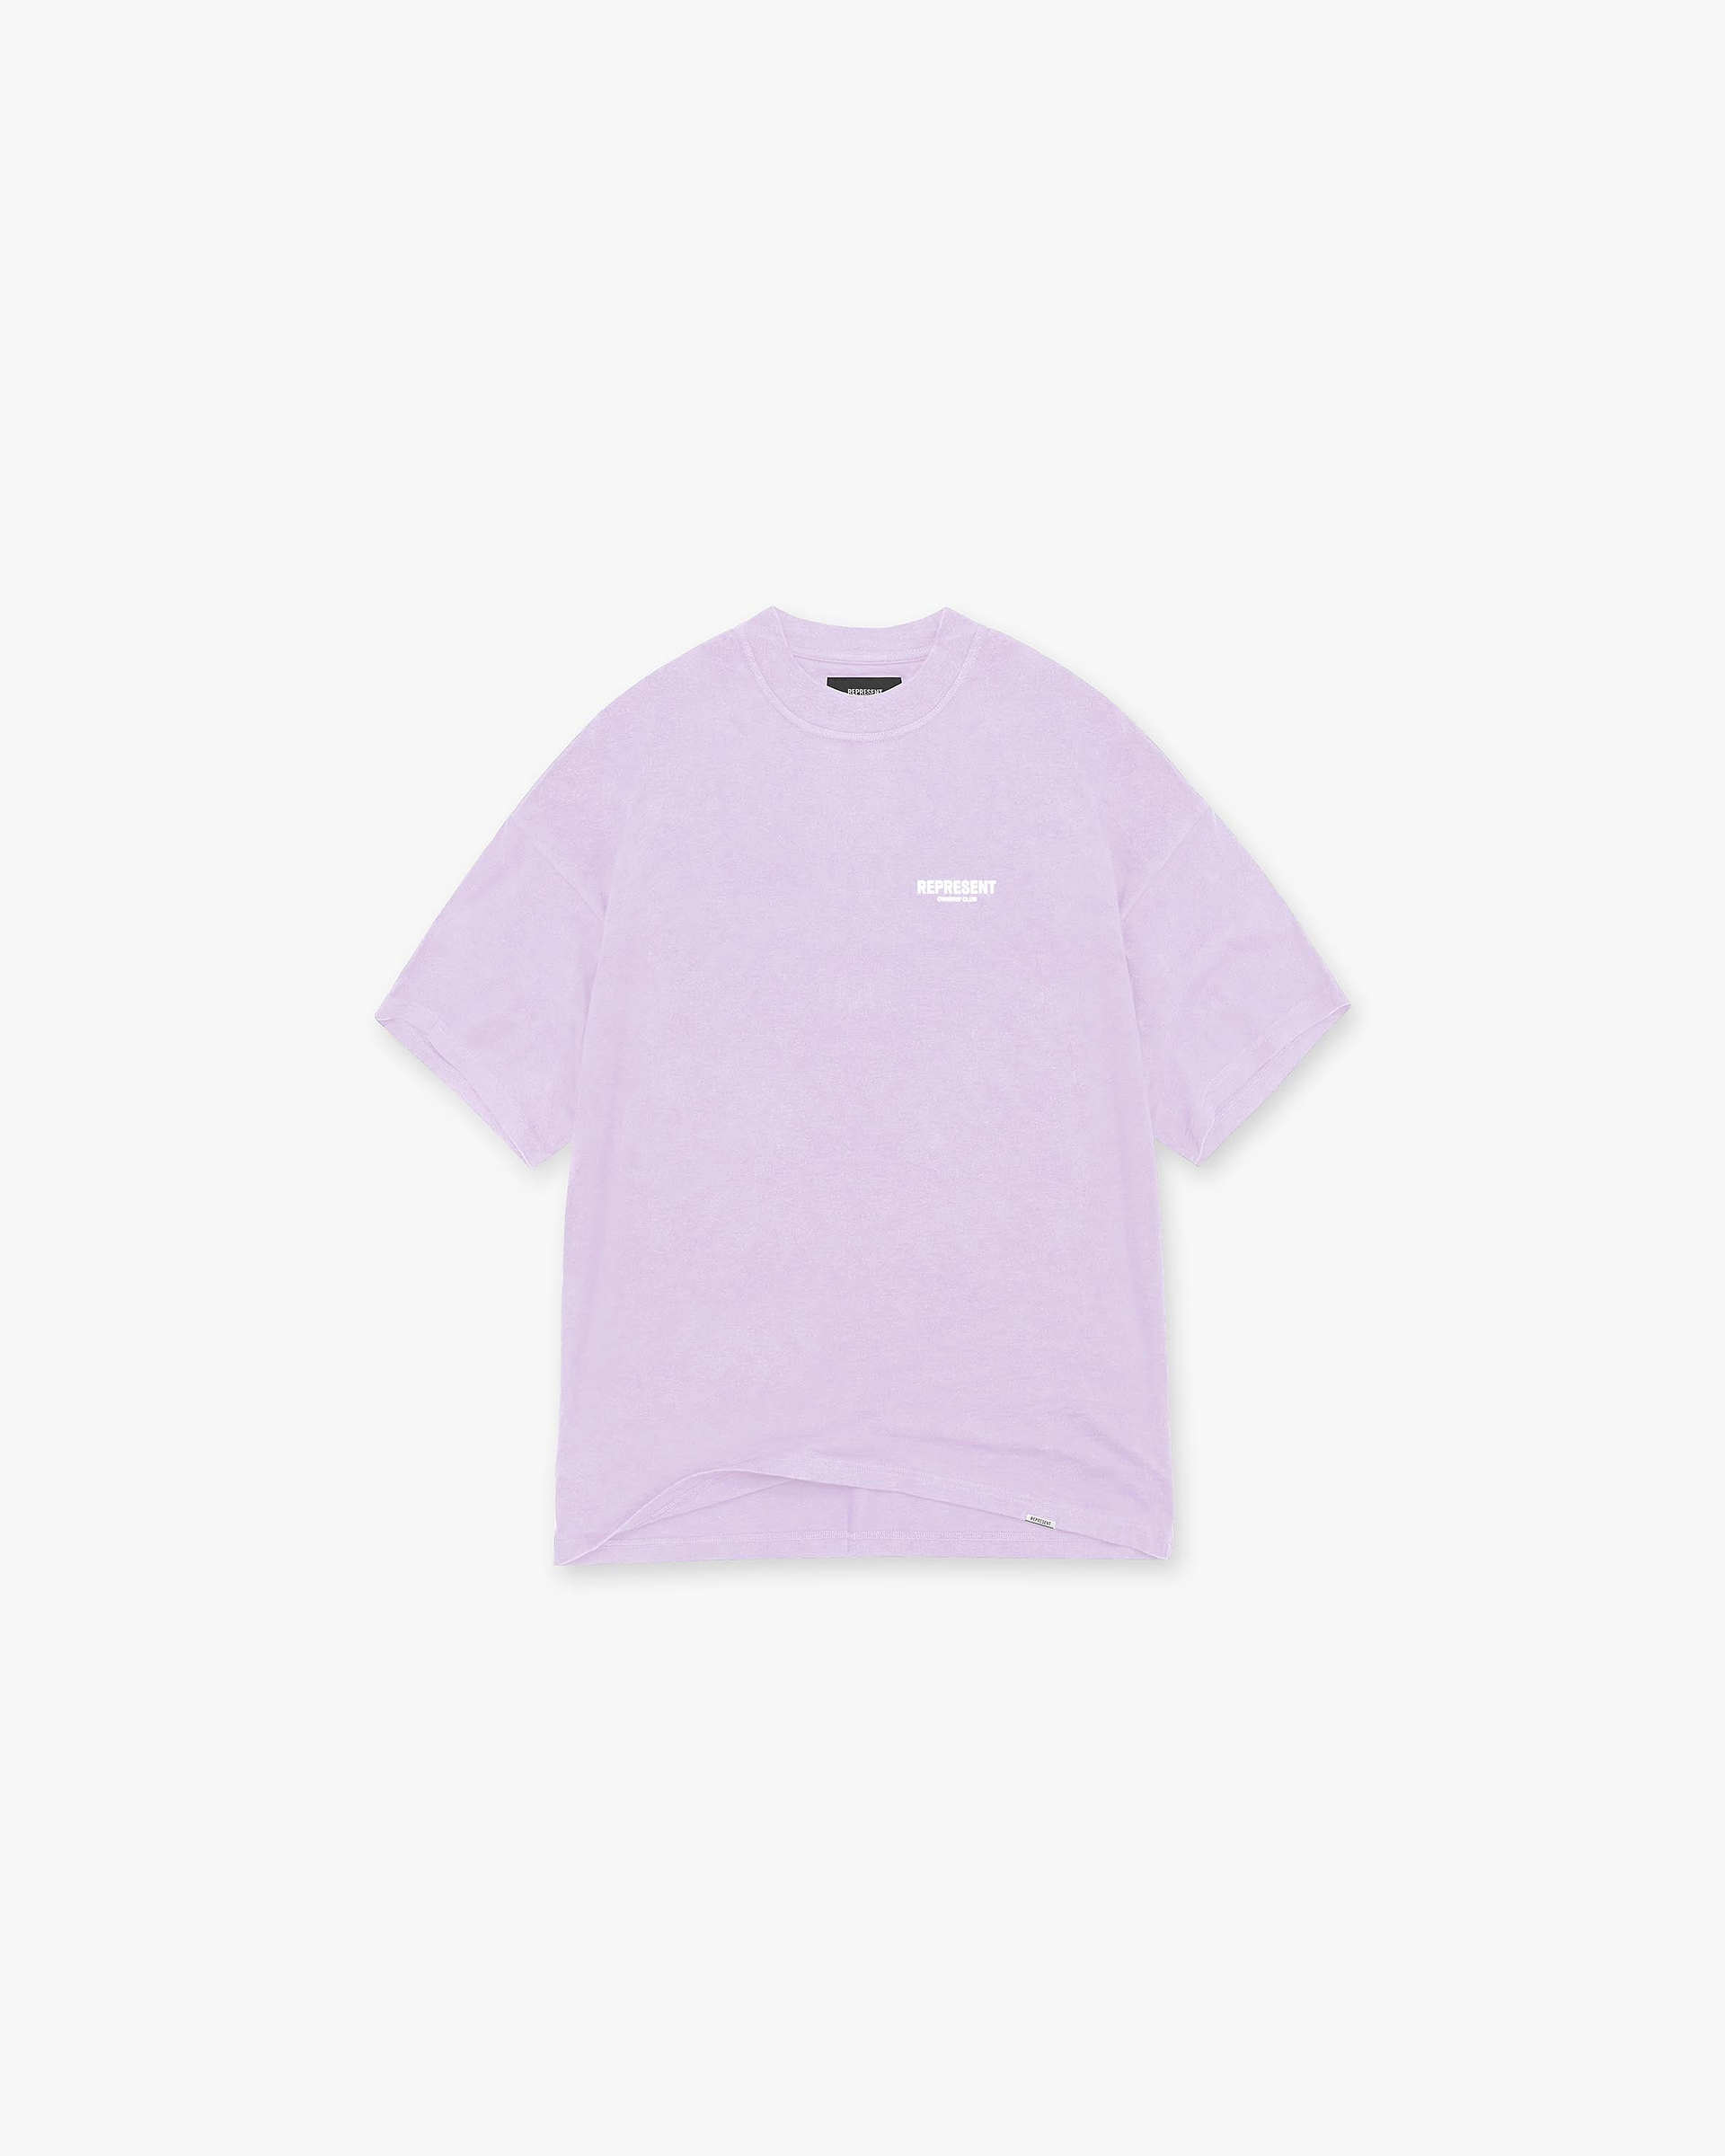 Represent Owners Club T-Shirt - Lilac